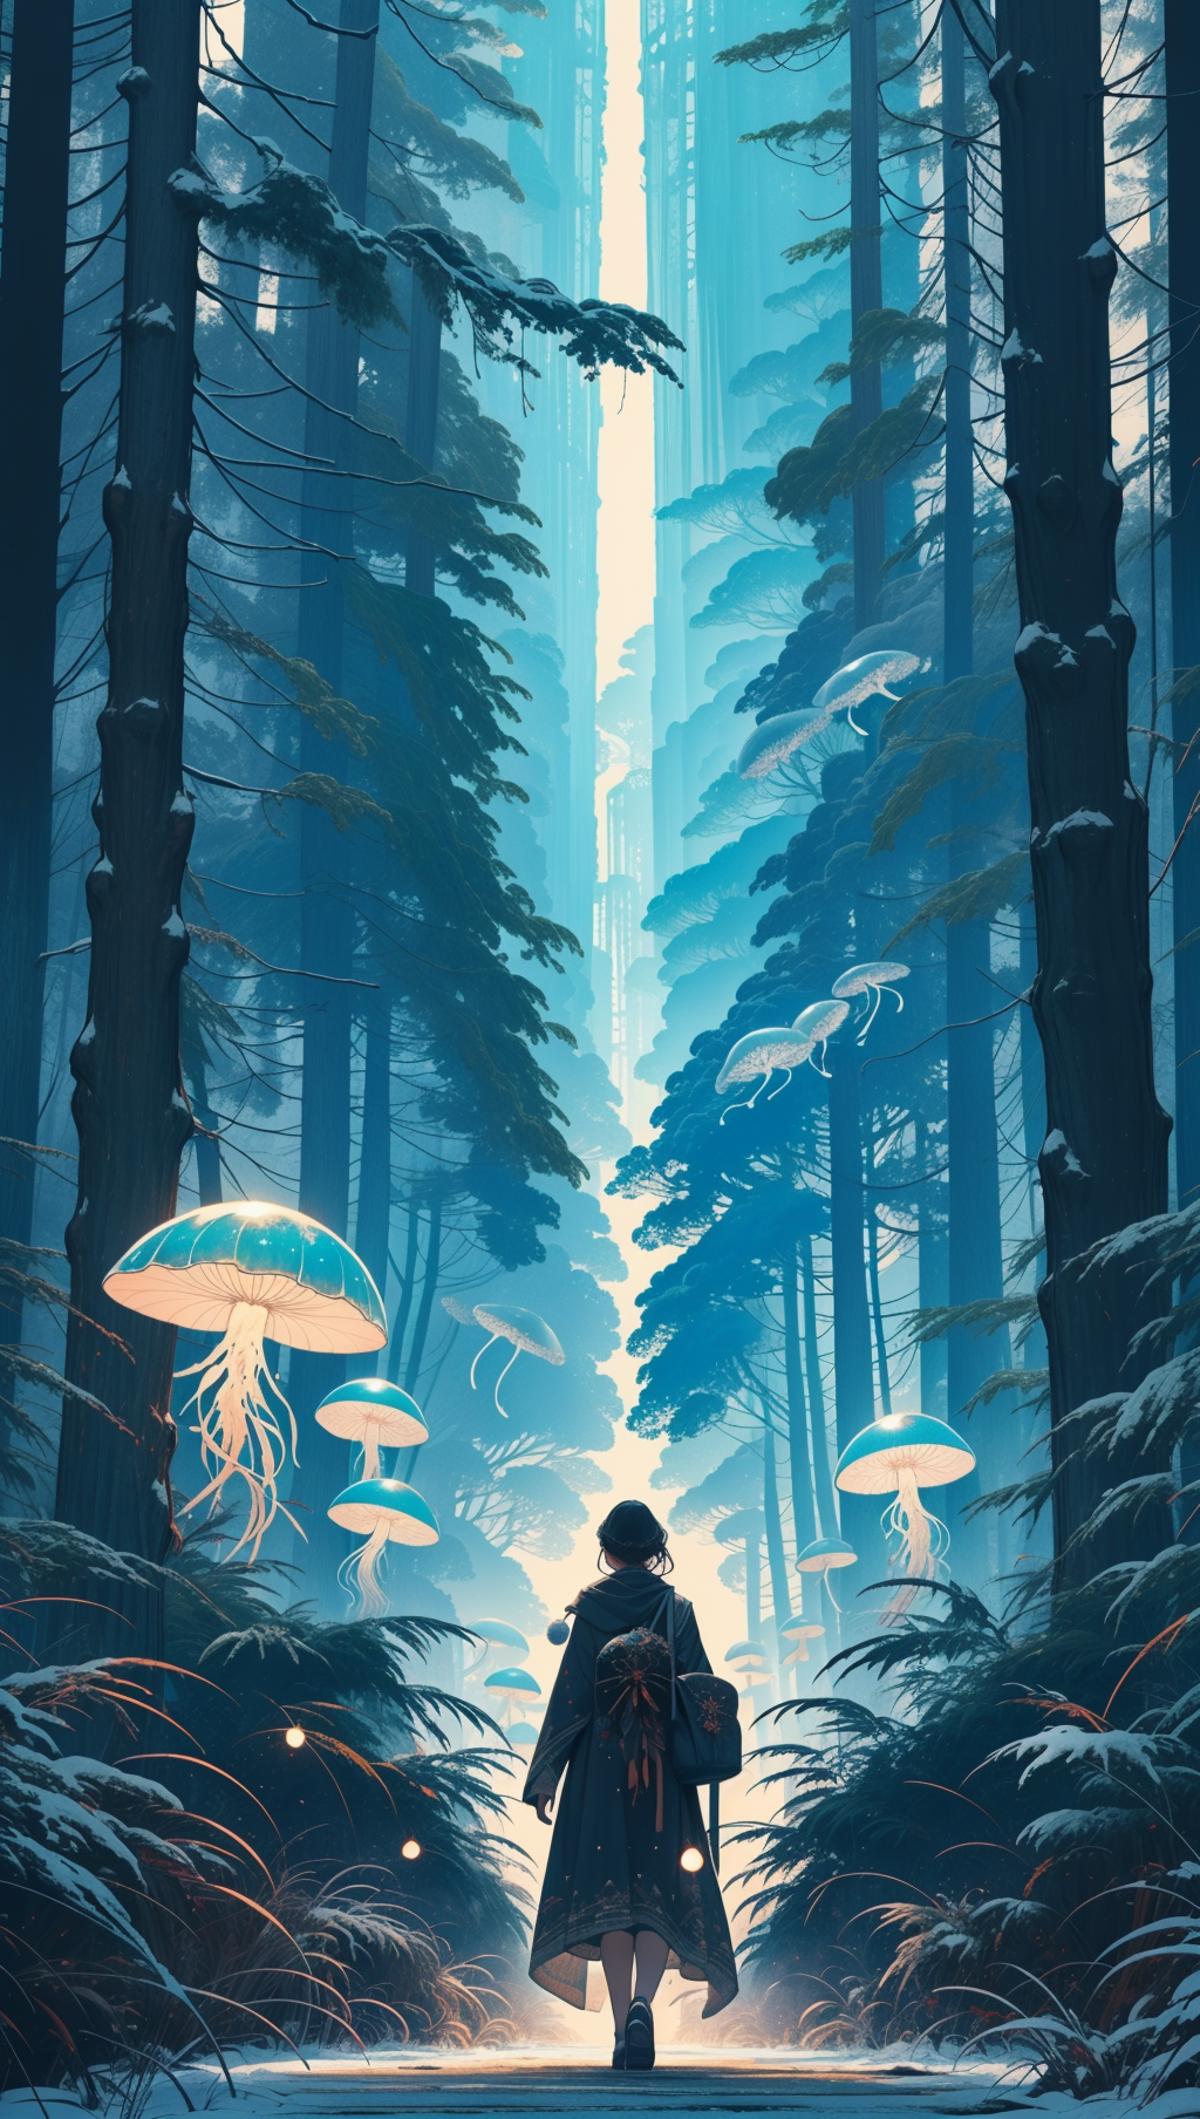 A person walking through a forest with glowing jellyfish floating above.